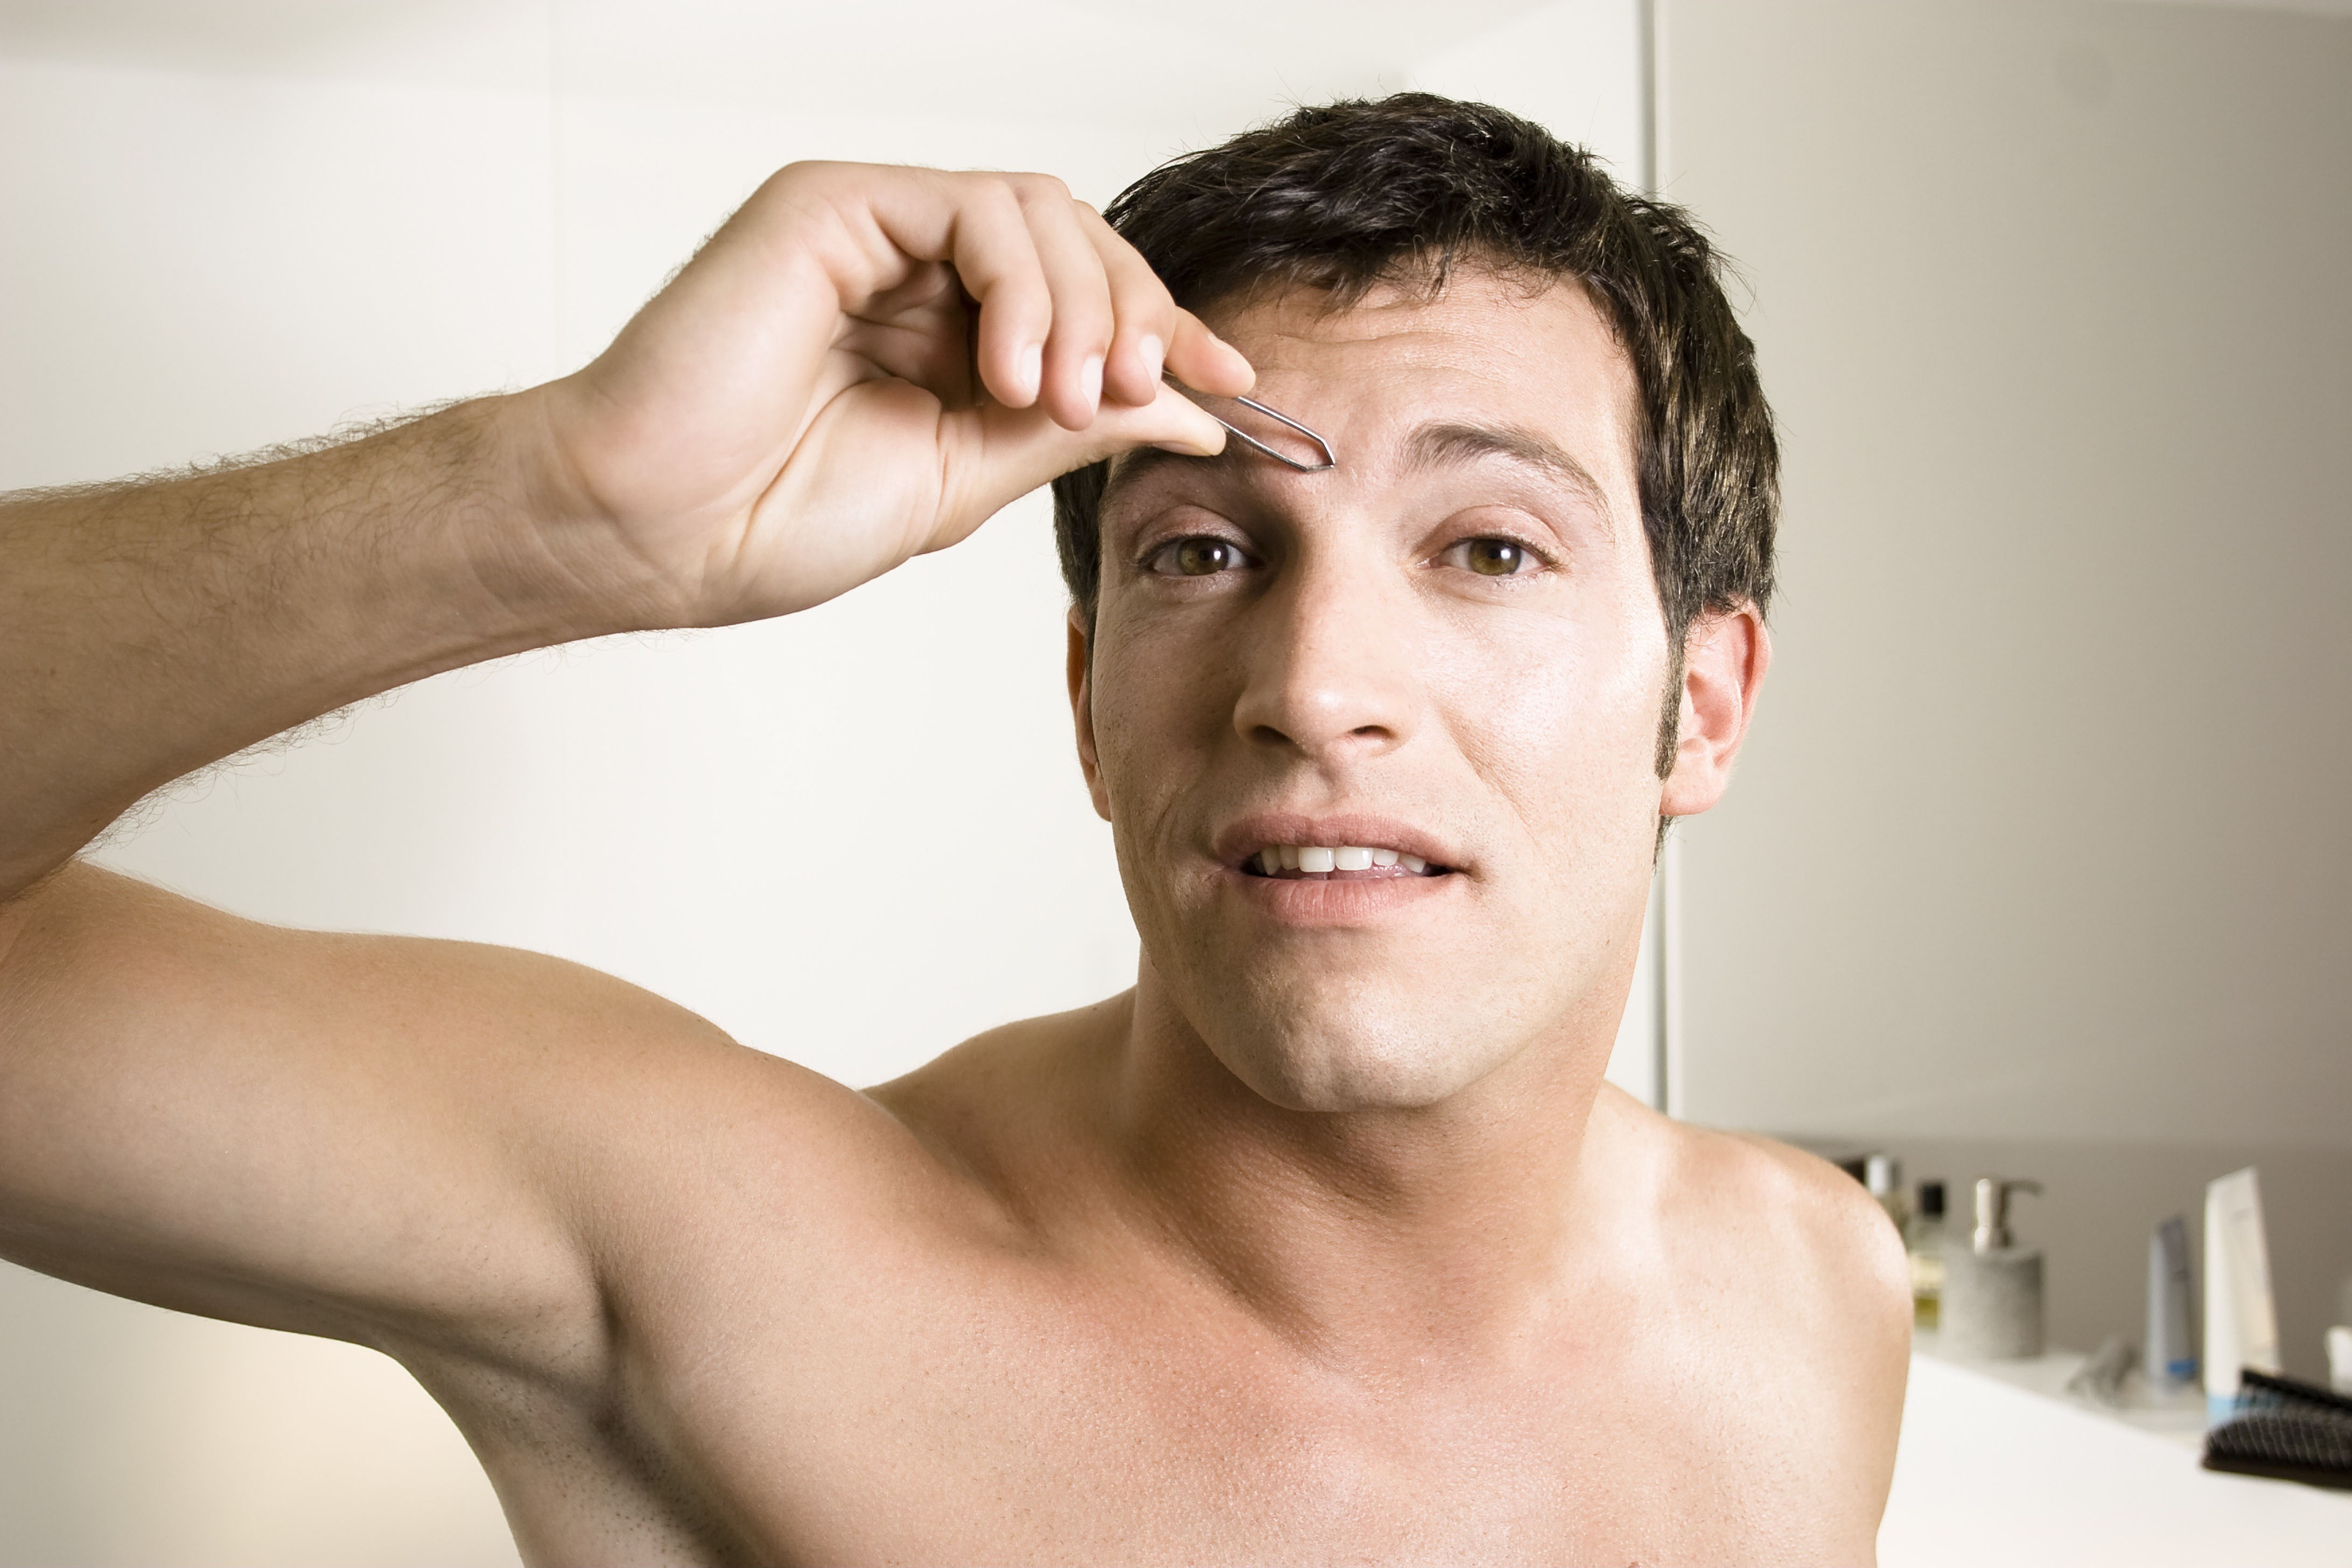 Nobody loves a unibrow. A simple grooming tip for if your eyebrows start misbehaving – pluck them after showering. Photo: Alamy